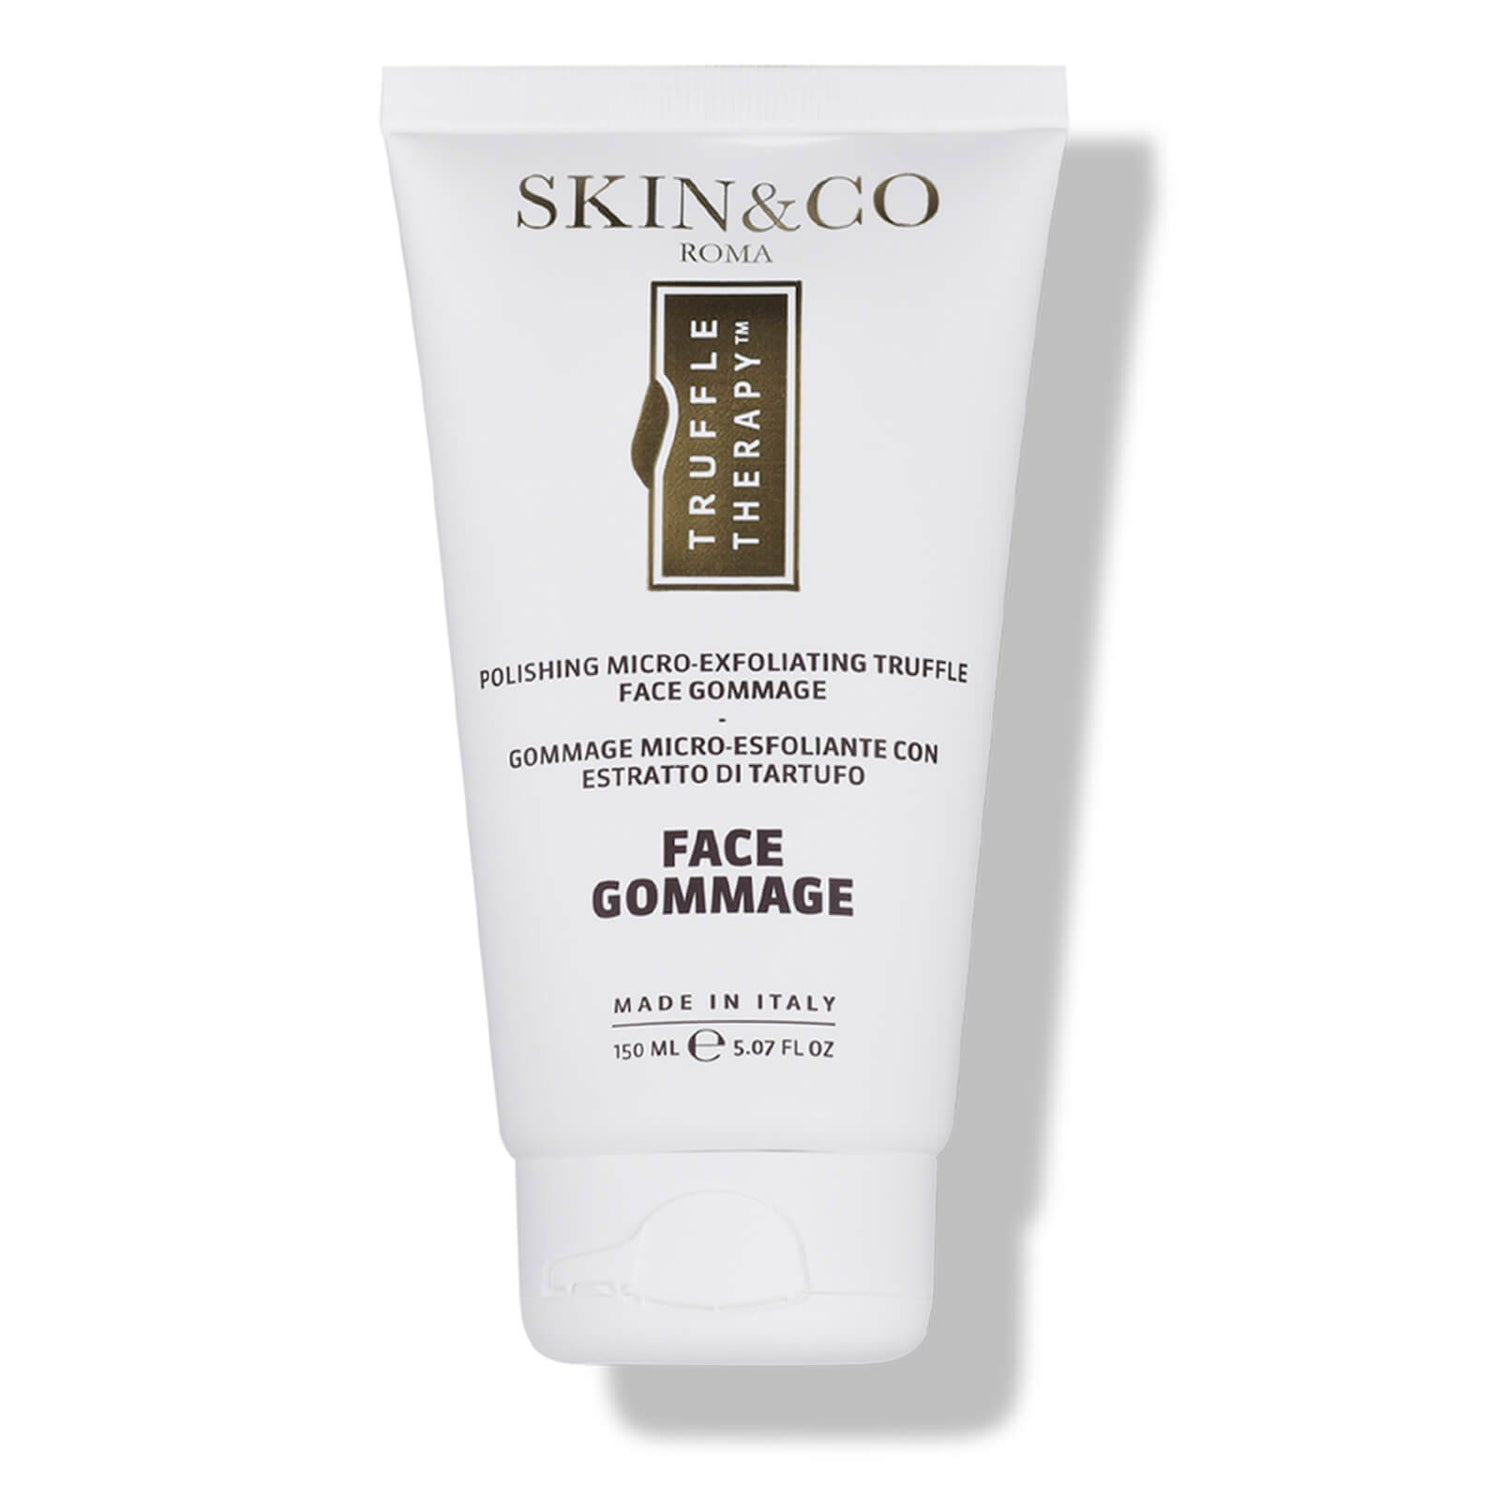 Skin&Co Roma Truffle Therapy Face Gommage 5.07 fl. oz